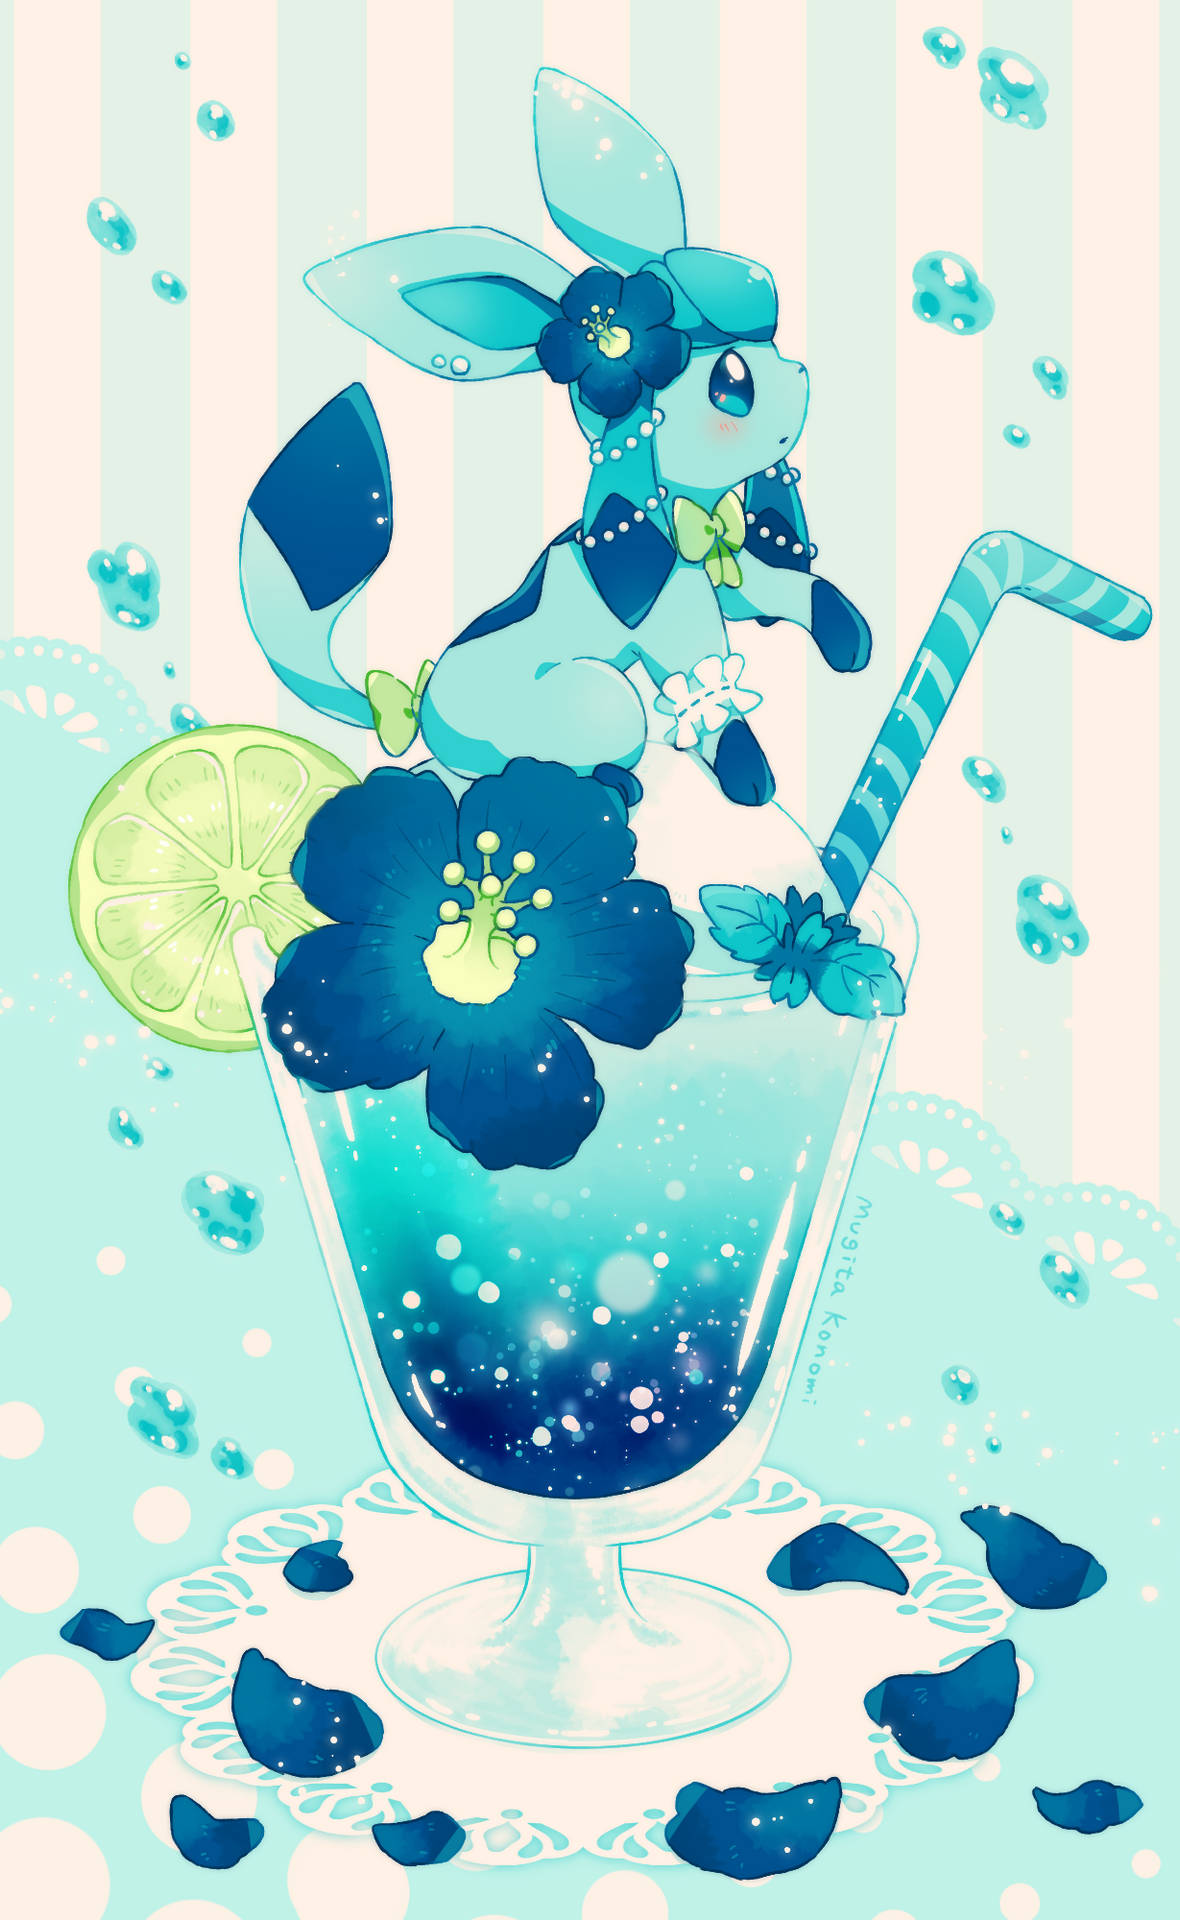 “Warm summer days are the best with a tropical drink!” Wallpaper